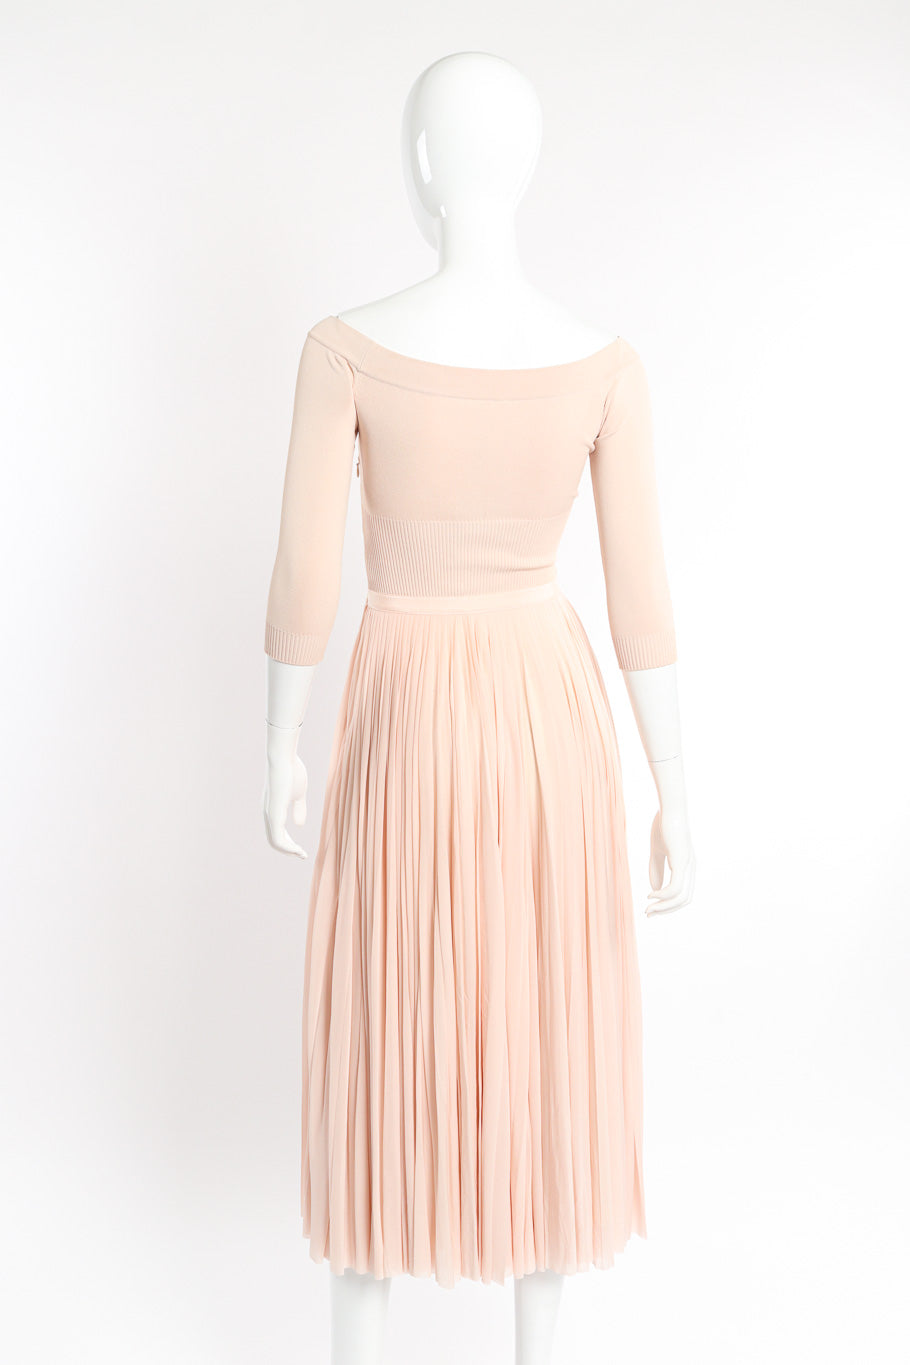 Alexander McQueen Off-The-Shoulder Pleated Knit Dress back view on mannequin @recessla